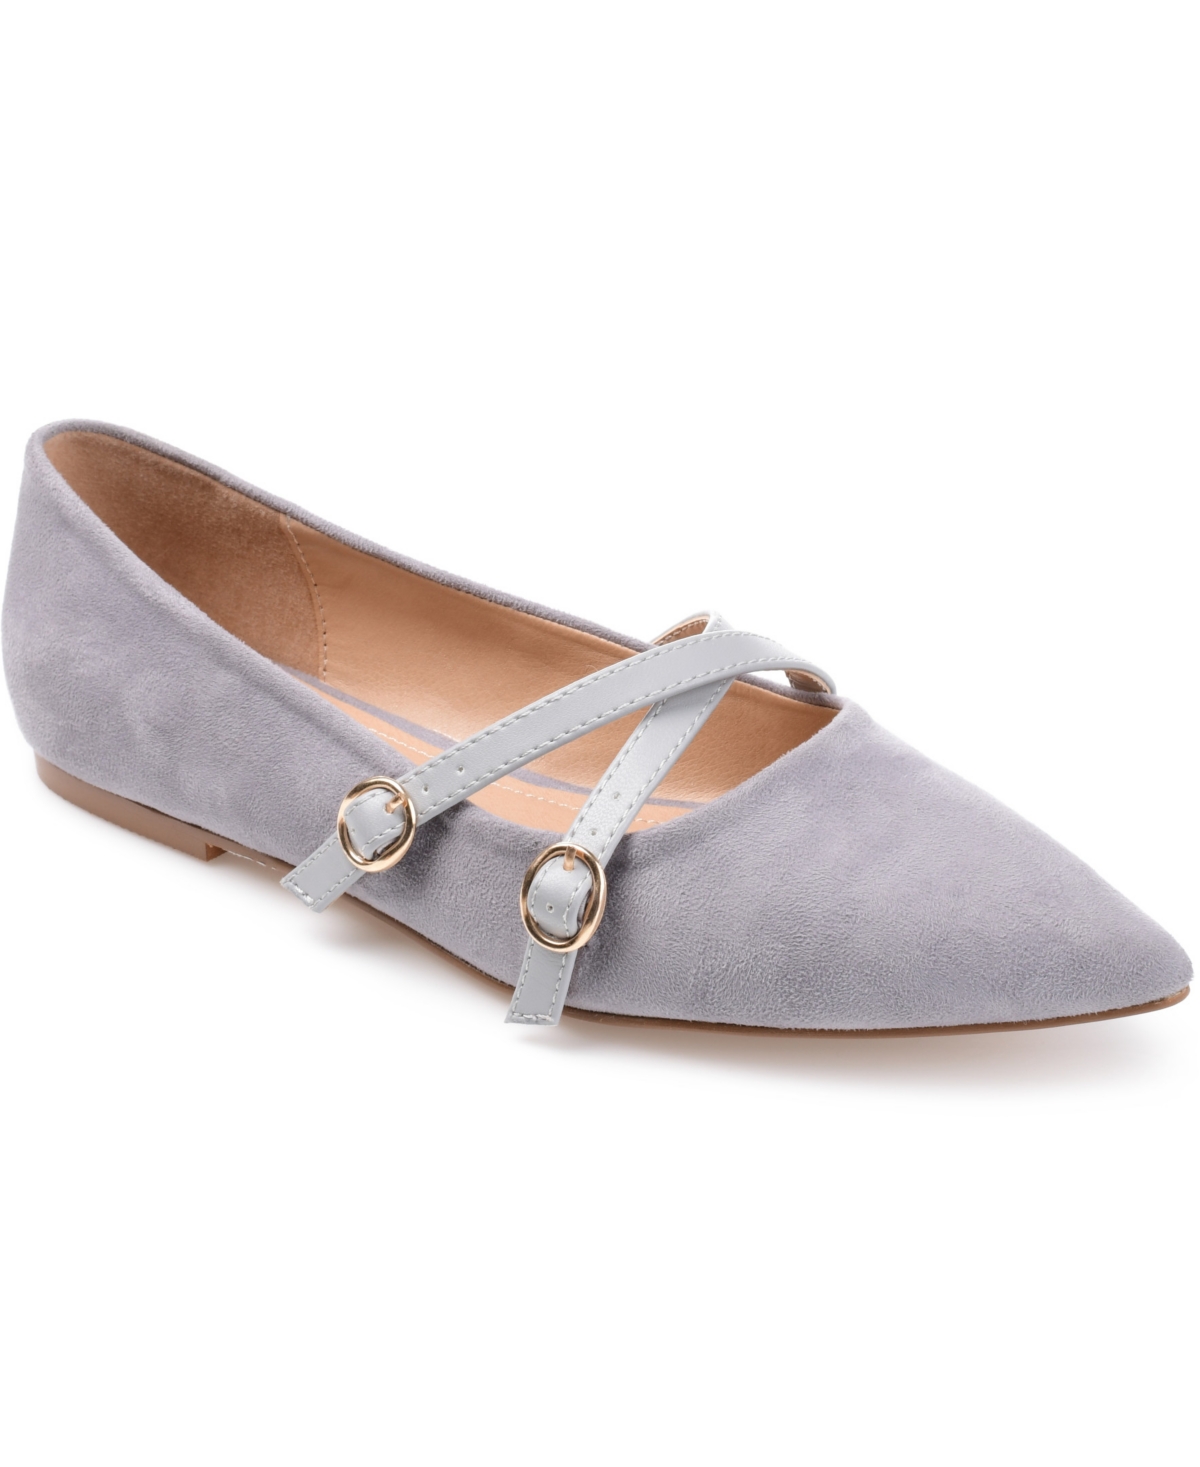 Women's Patricia Wide Width Slip On Pointed Toe Ballet Flats - Gray